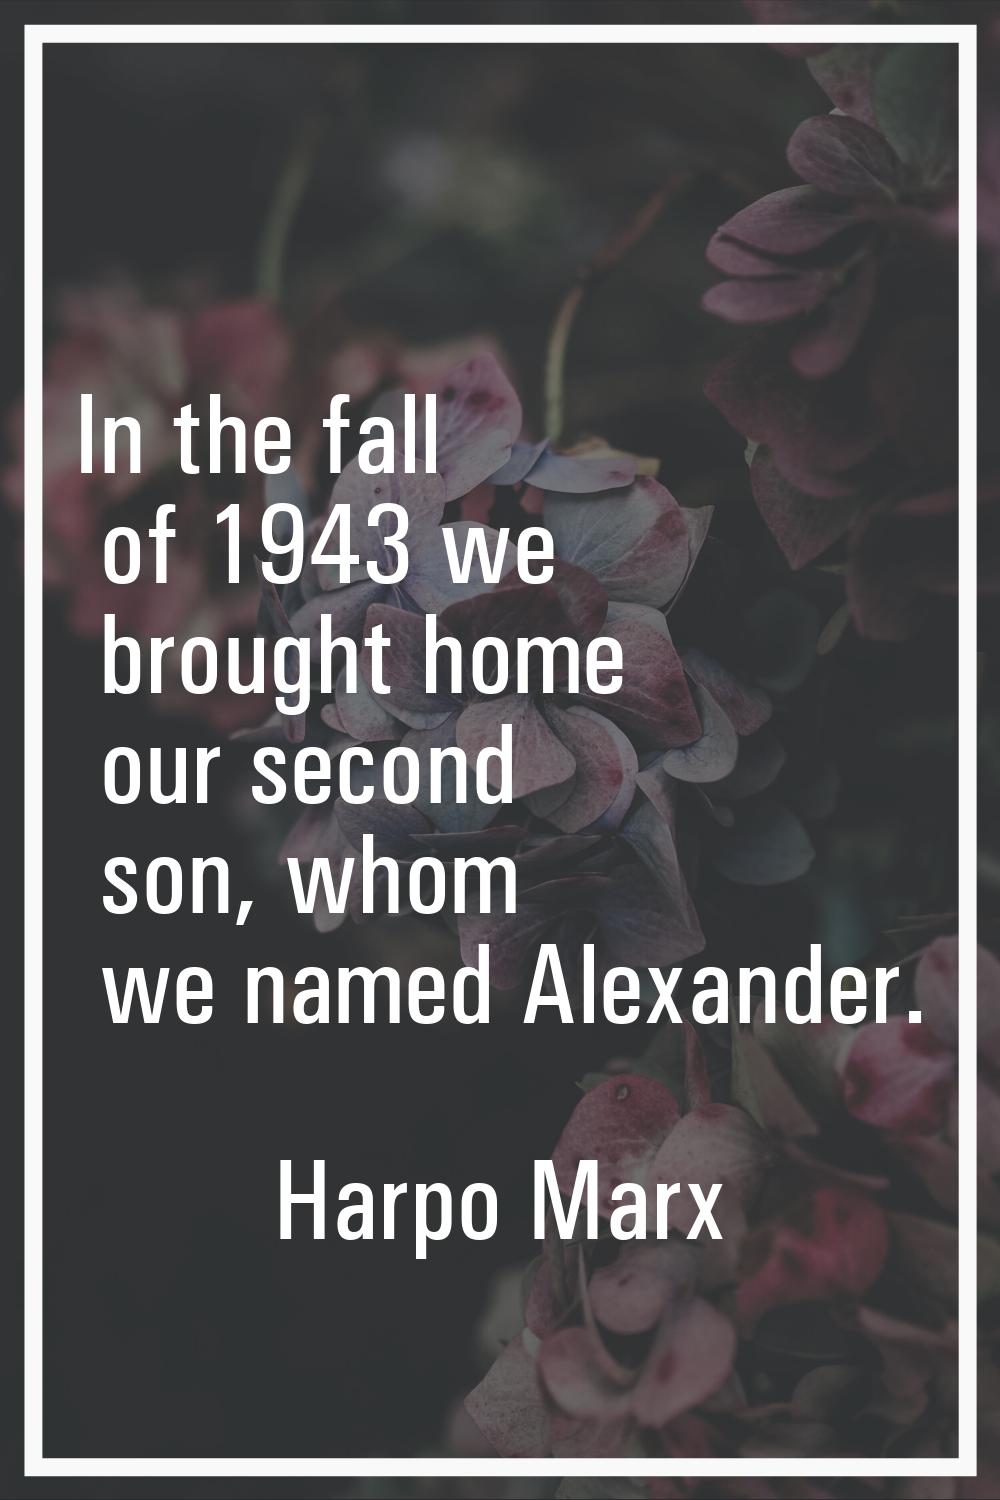 In the fall of 1943 we brought home our second son, whom we named Alexander.